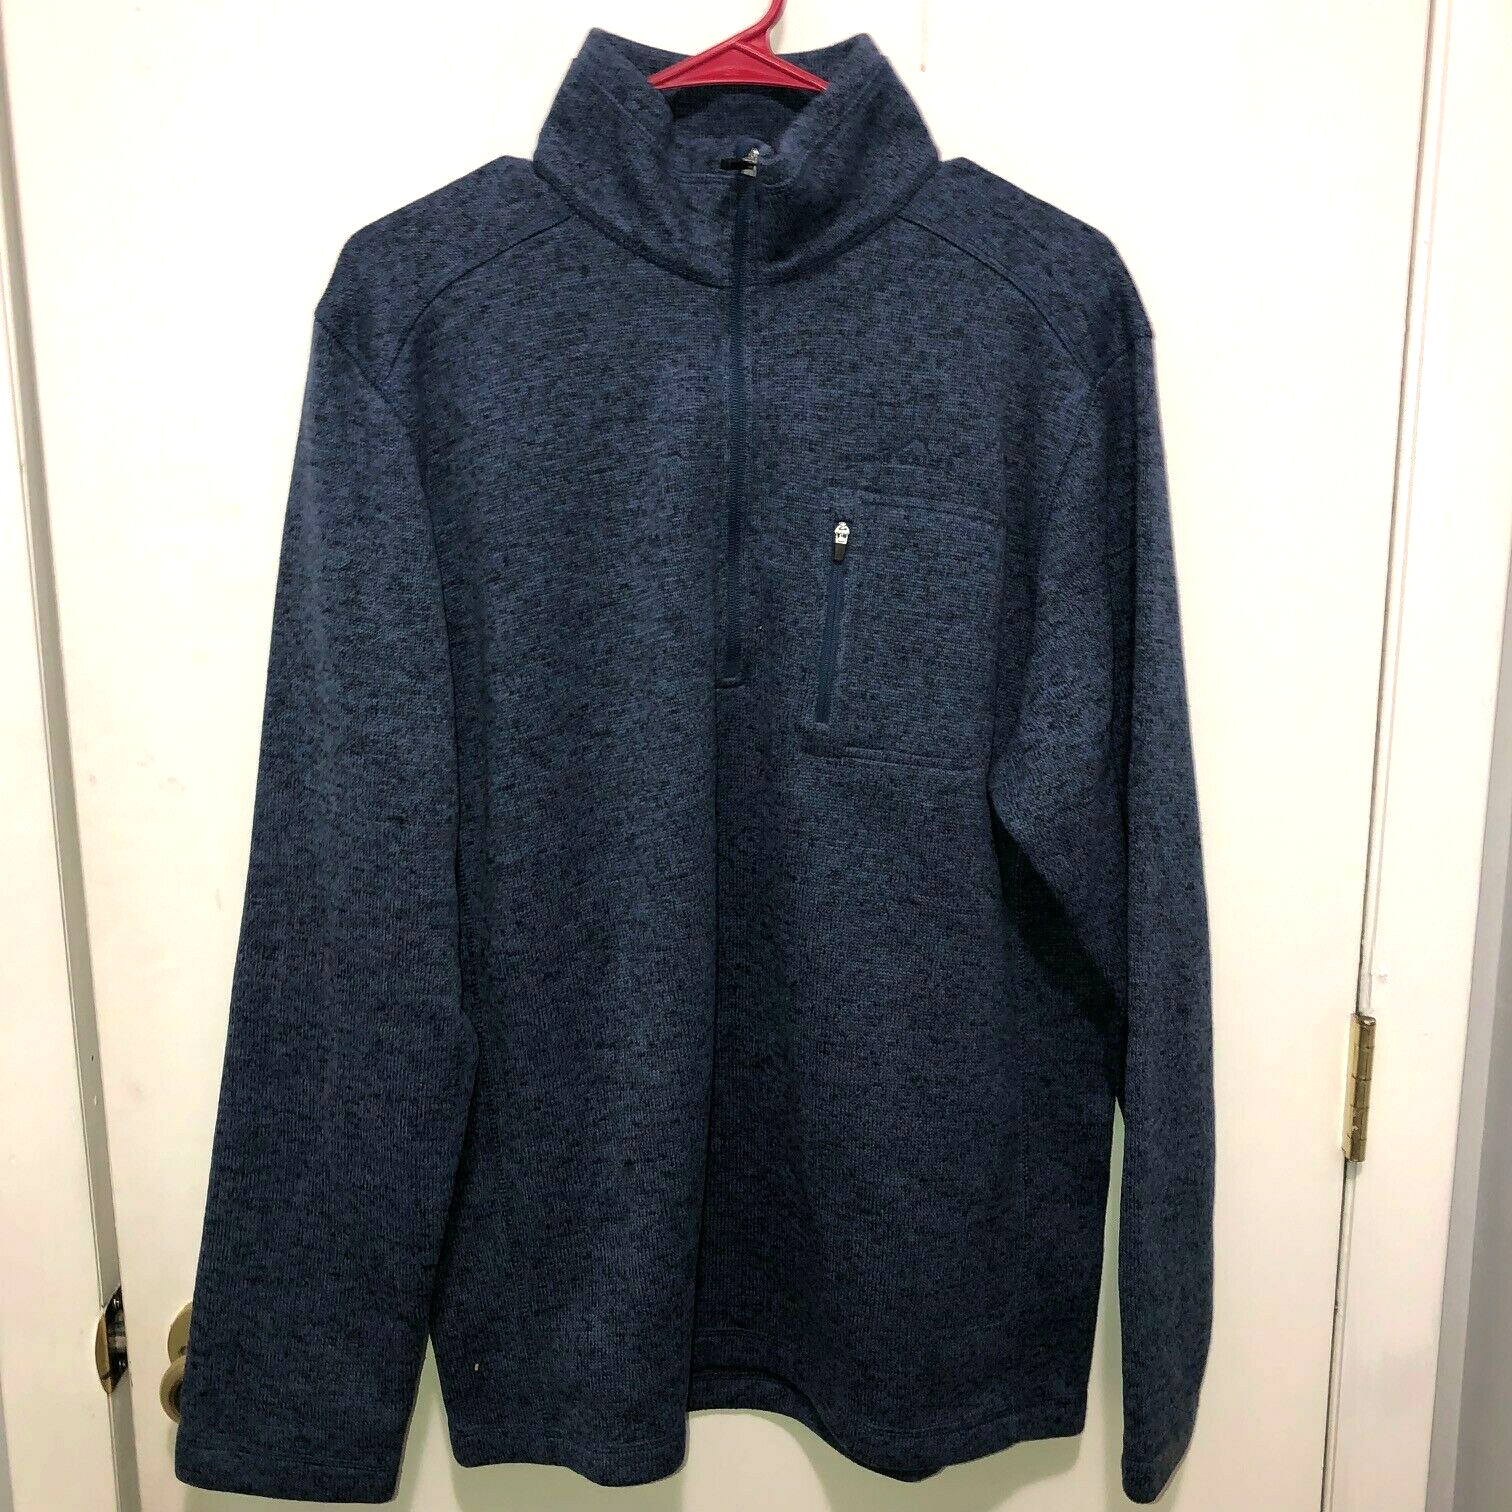 Primary image for Eddie Bauer 1/2 Zip Fleece Lined Pullover Sweater Men's SZ Large Marled Blue NEW